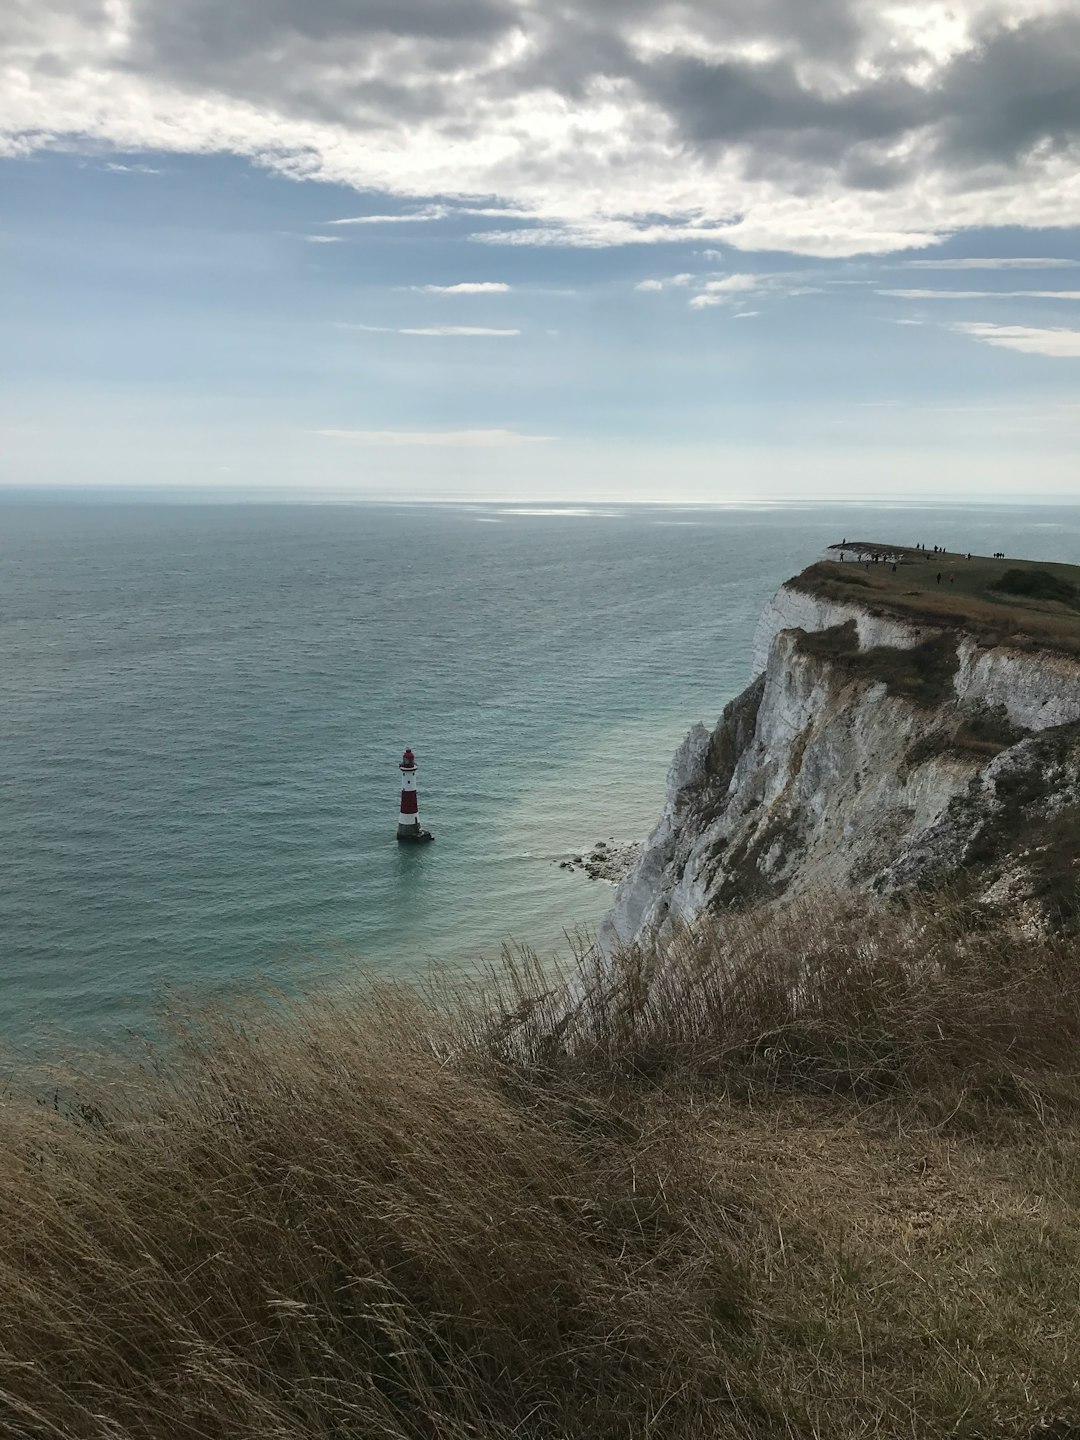 Cliff photo spot BN20 South Foreland Heritage Coast